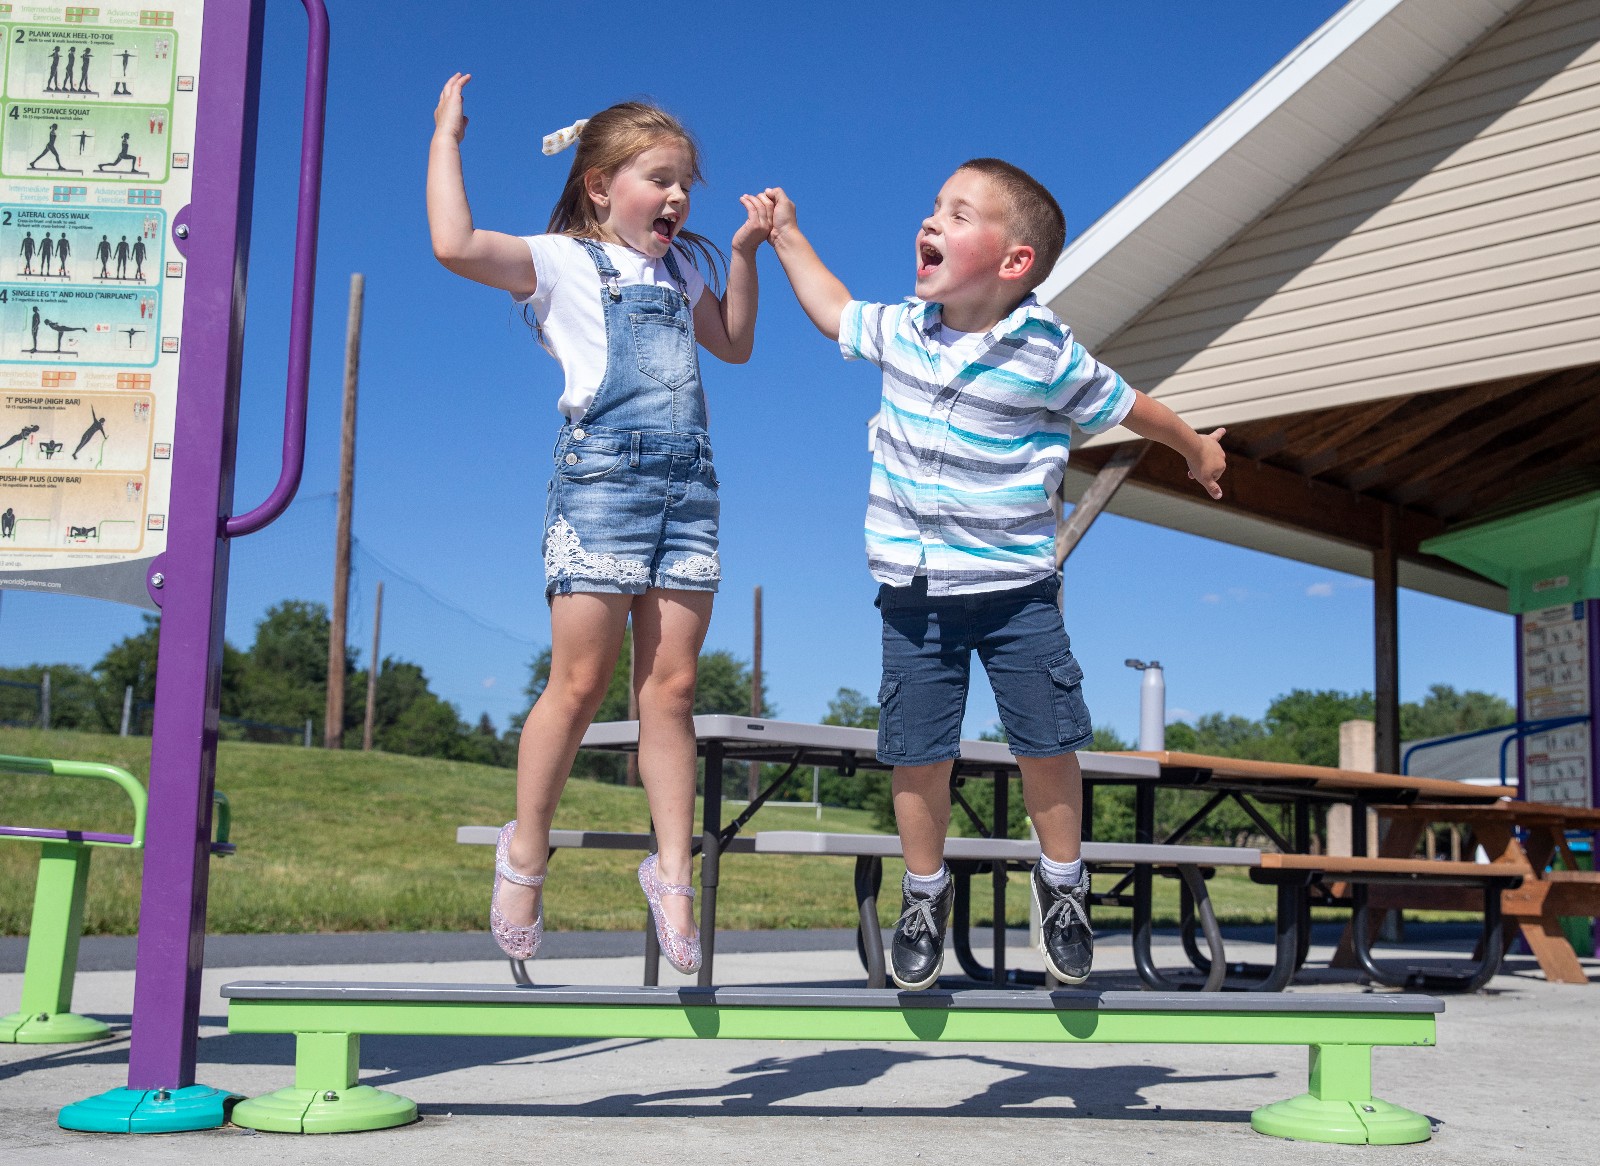 Miracle Child siblings Laken and Deacon jump joyfully off a balance beam at a playground in York